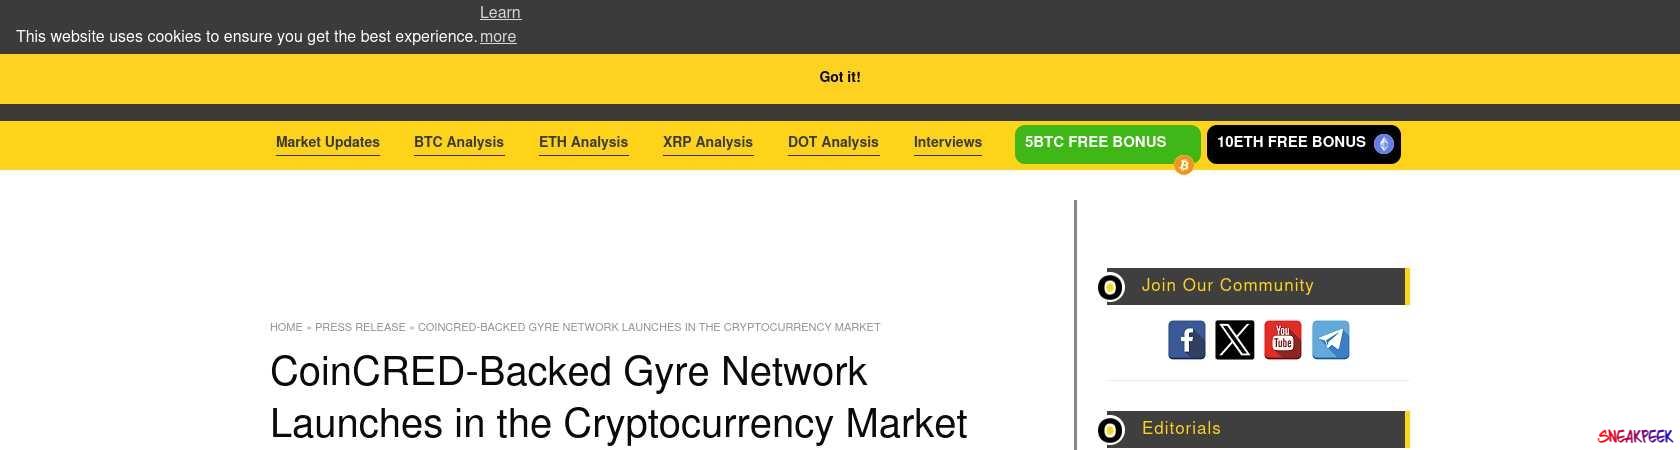 Read the full Article:  ⭲ CoinCRED-Backed Gyre Network Launches in the Cryptocurrency Market